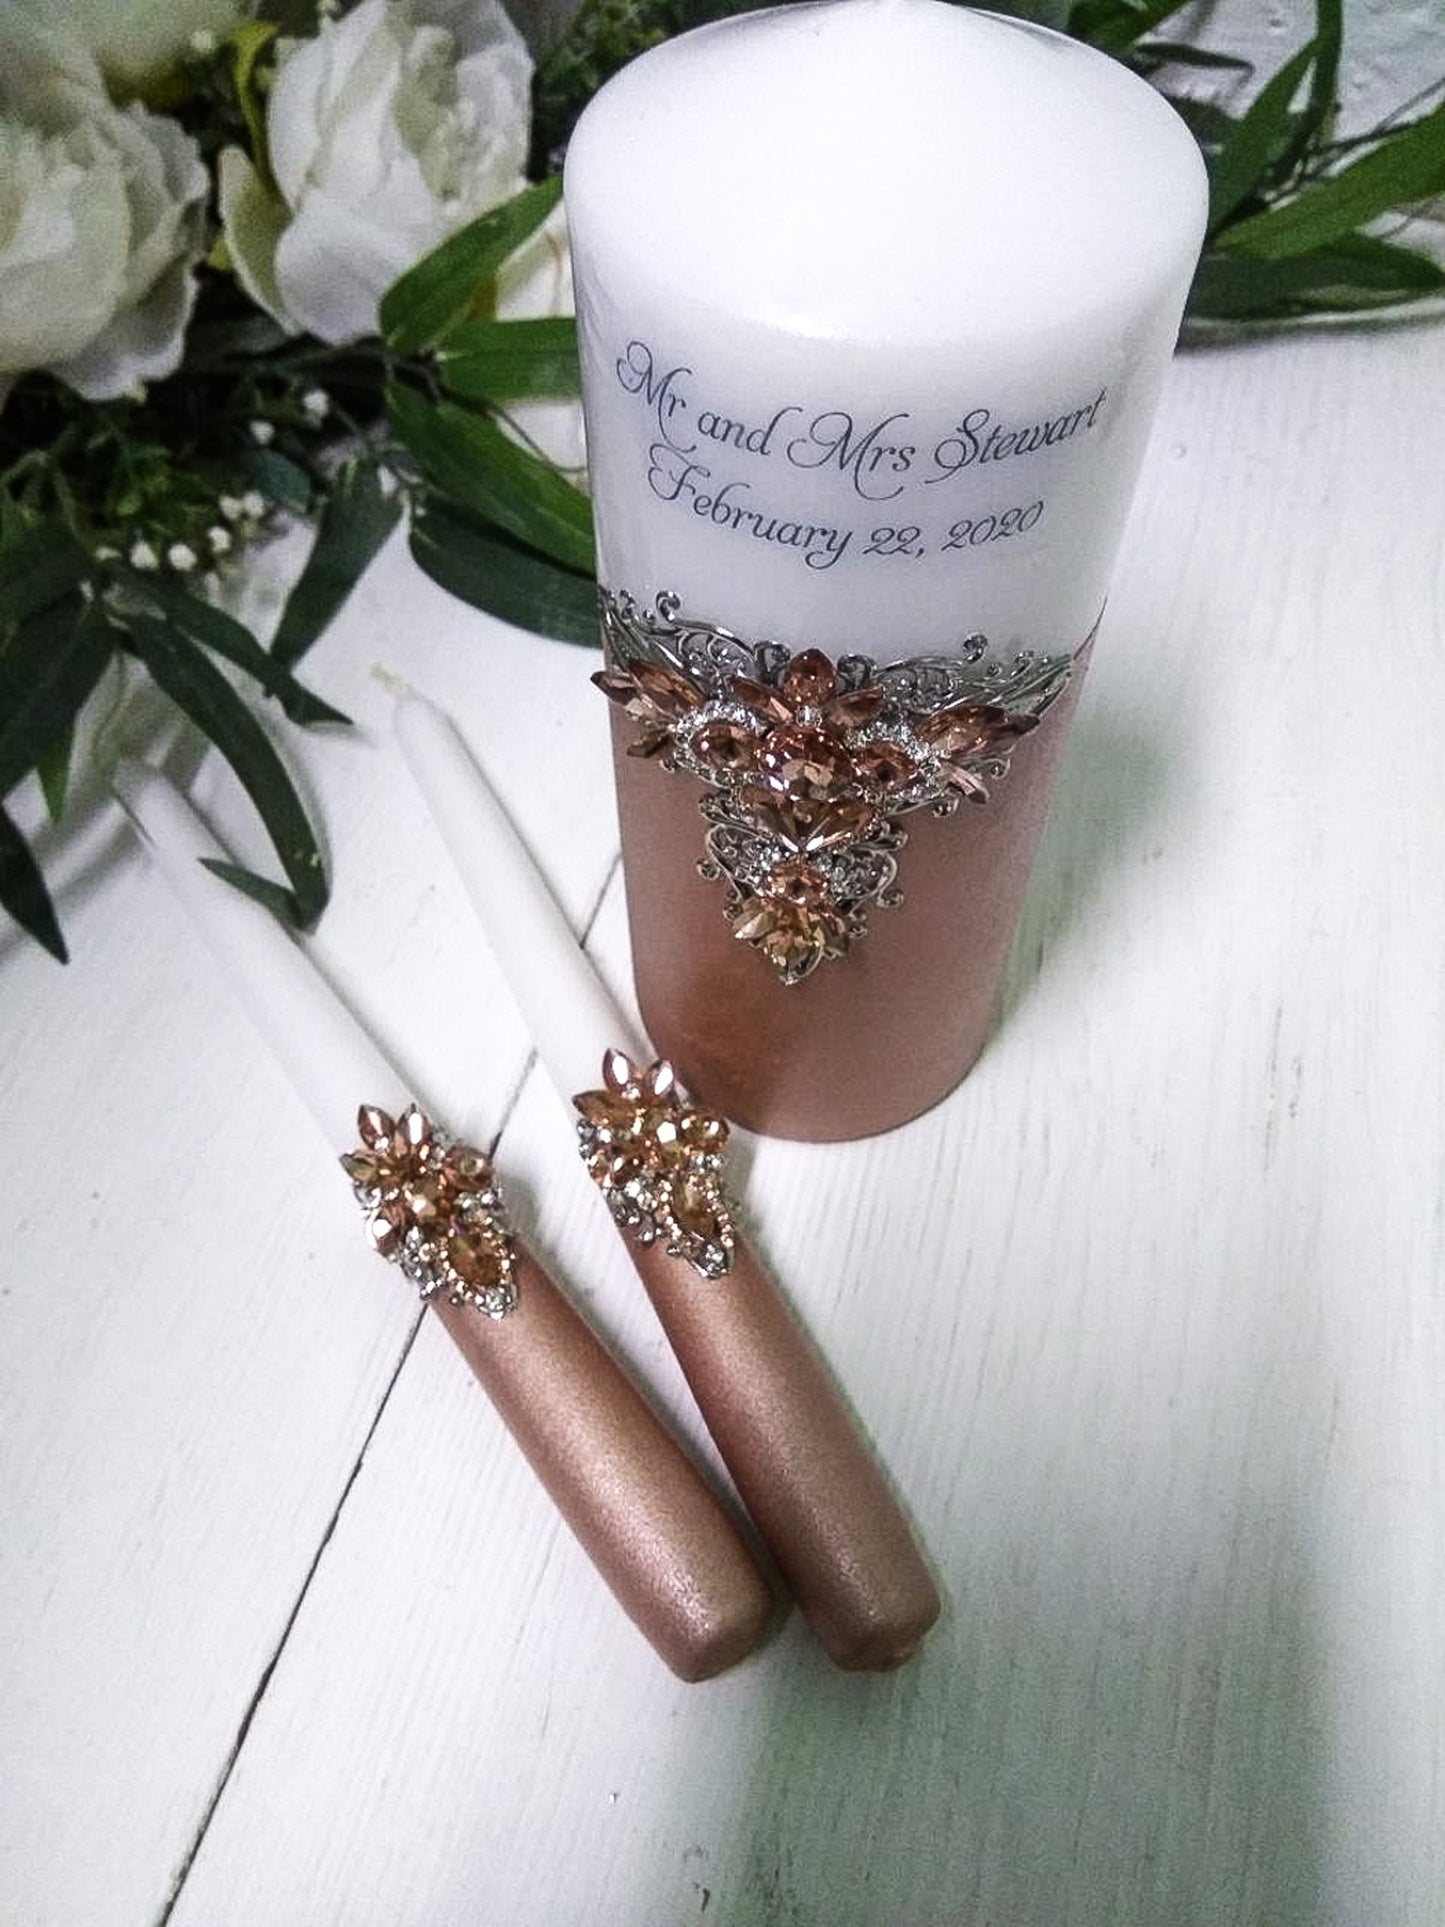 Personalized Rose Gold and Silver Decorative Unity Candles for Couples